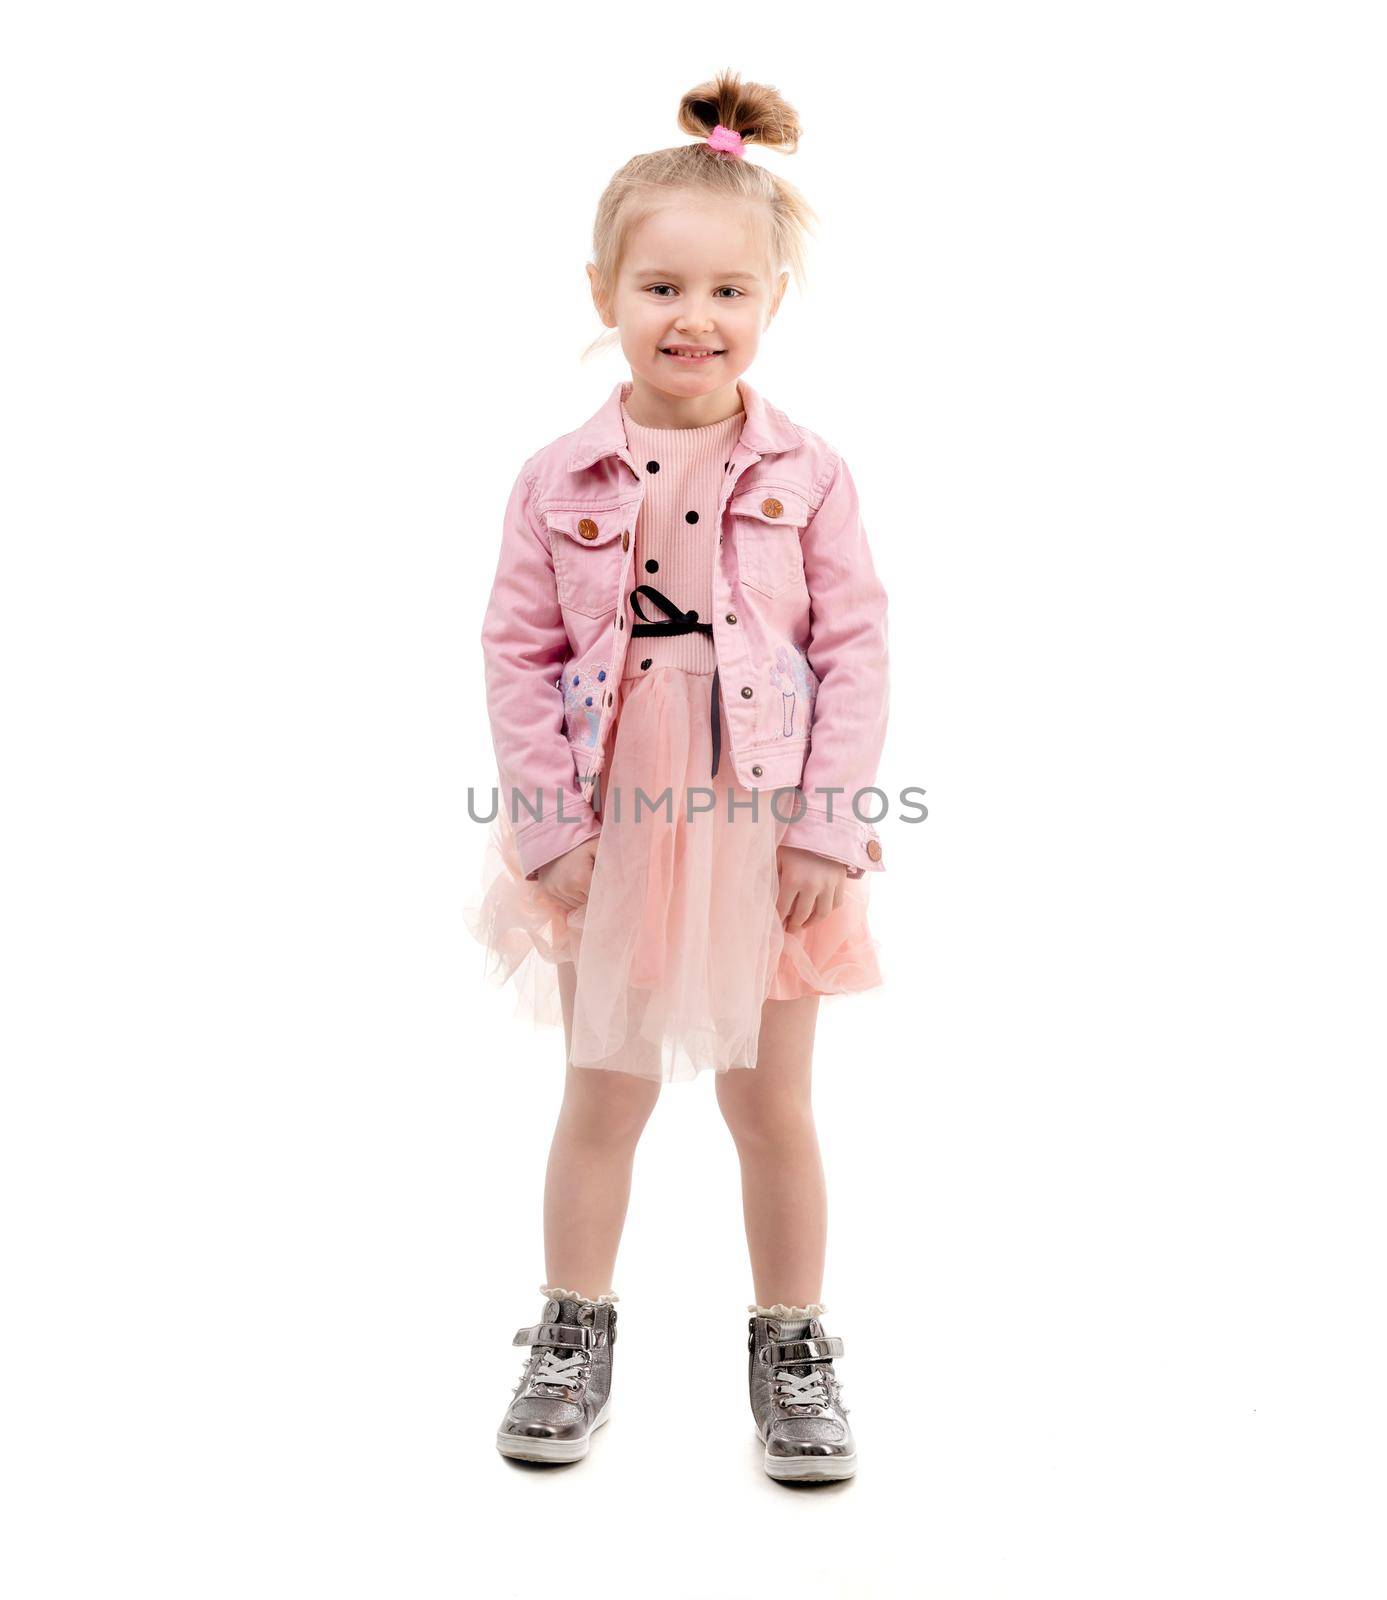 Amazing kid with lovely hairstyle moving around, turning and spinning, isolated, cute outfit